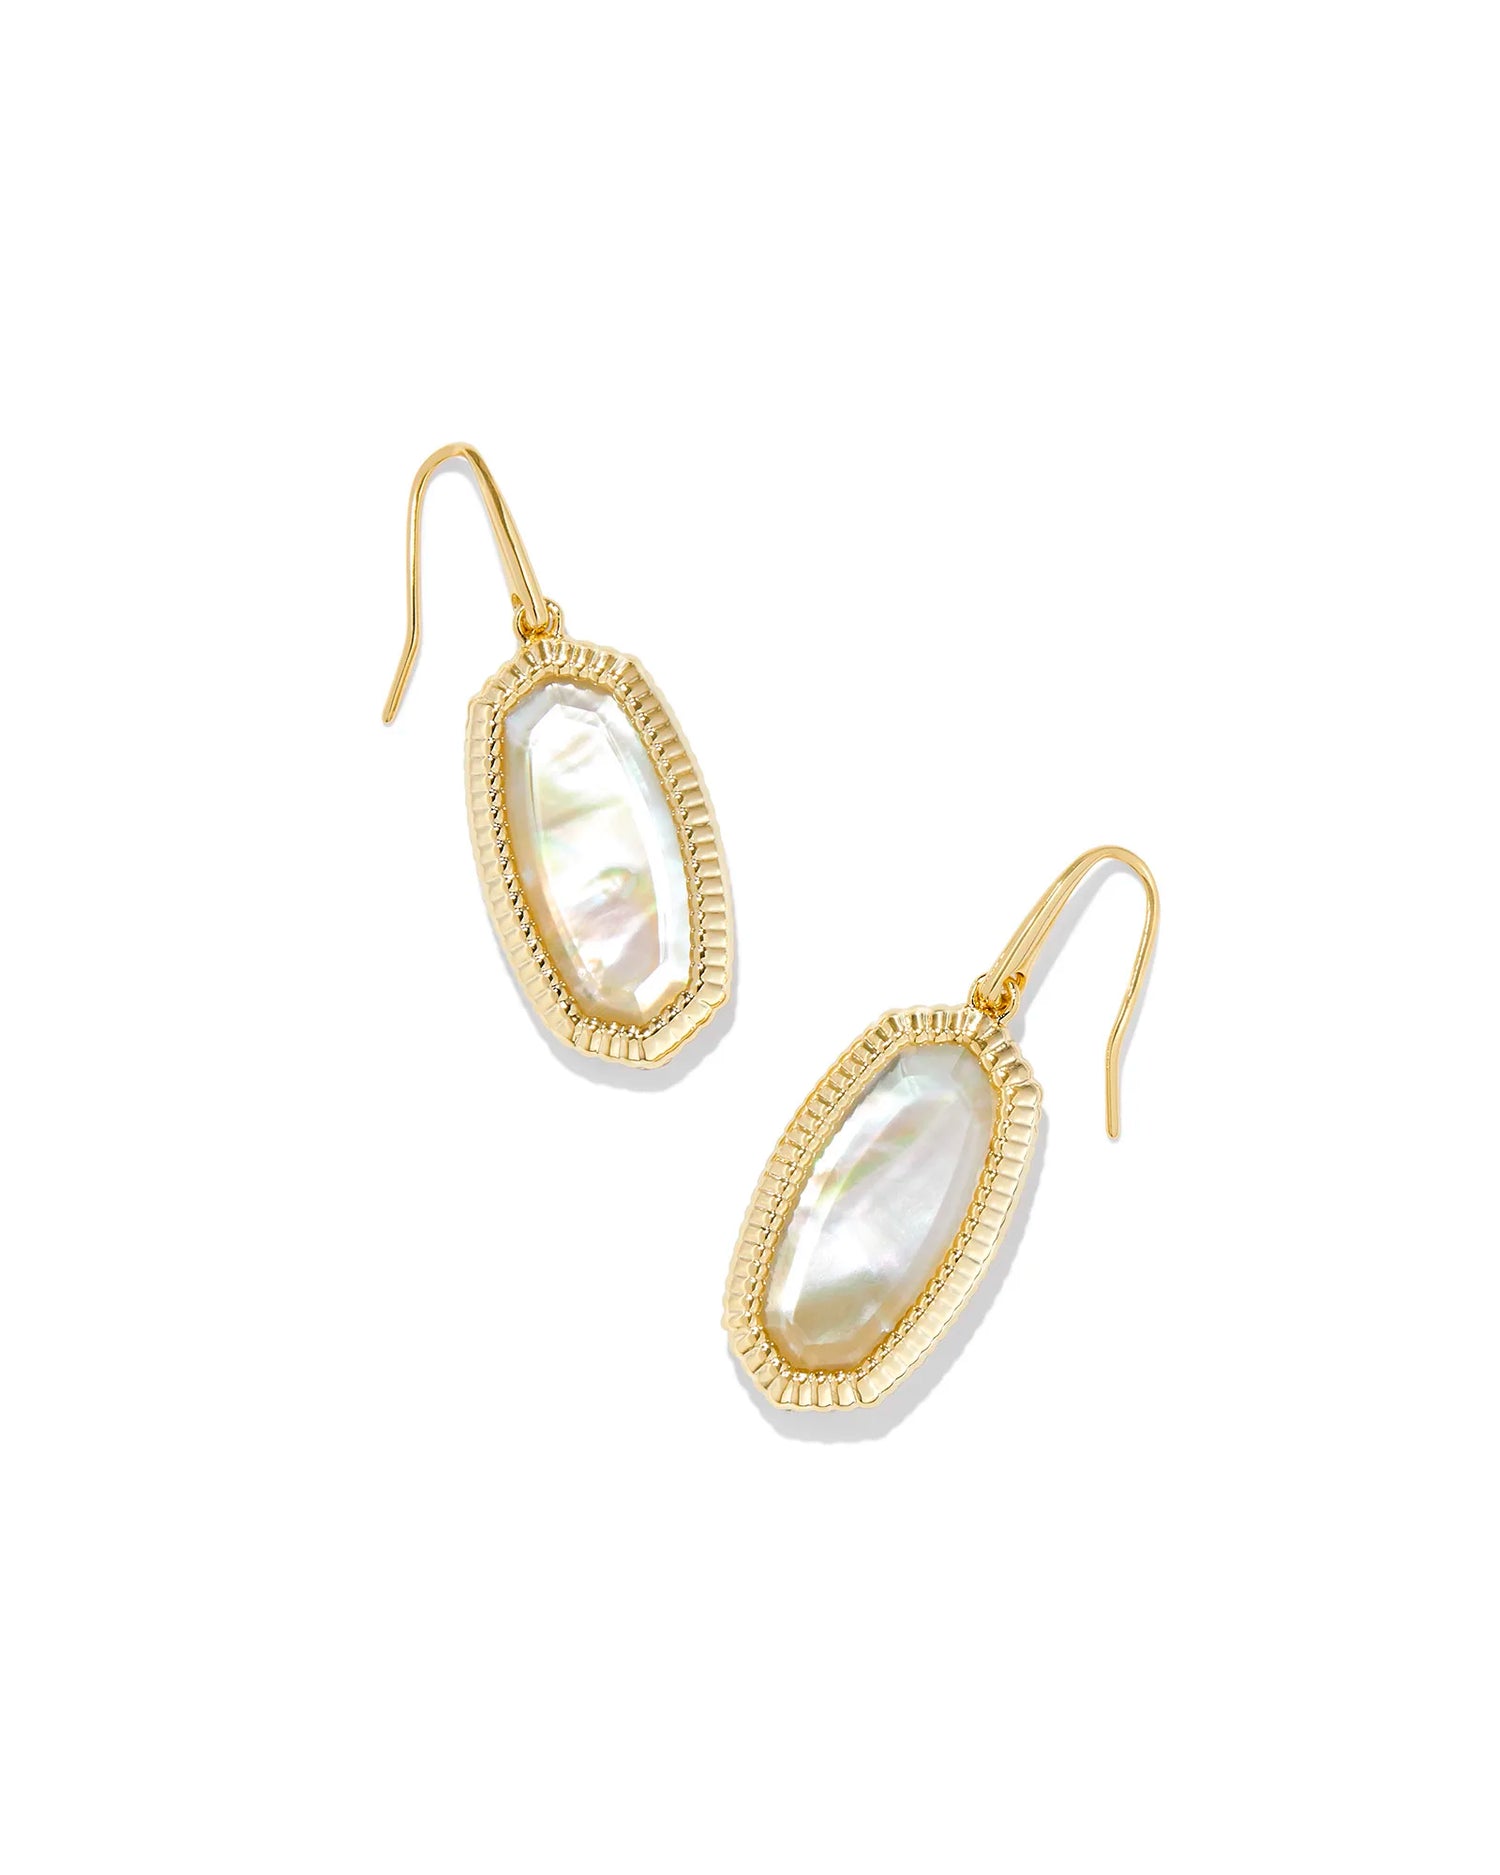 gold frame earrings with a golden abalone stone with a golden abalone 1.58"L X 0.55"W